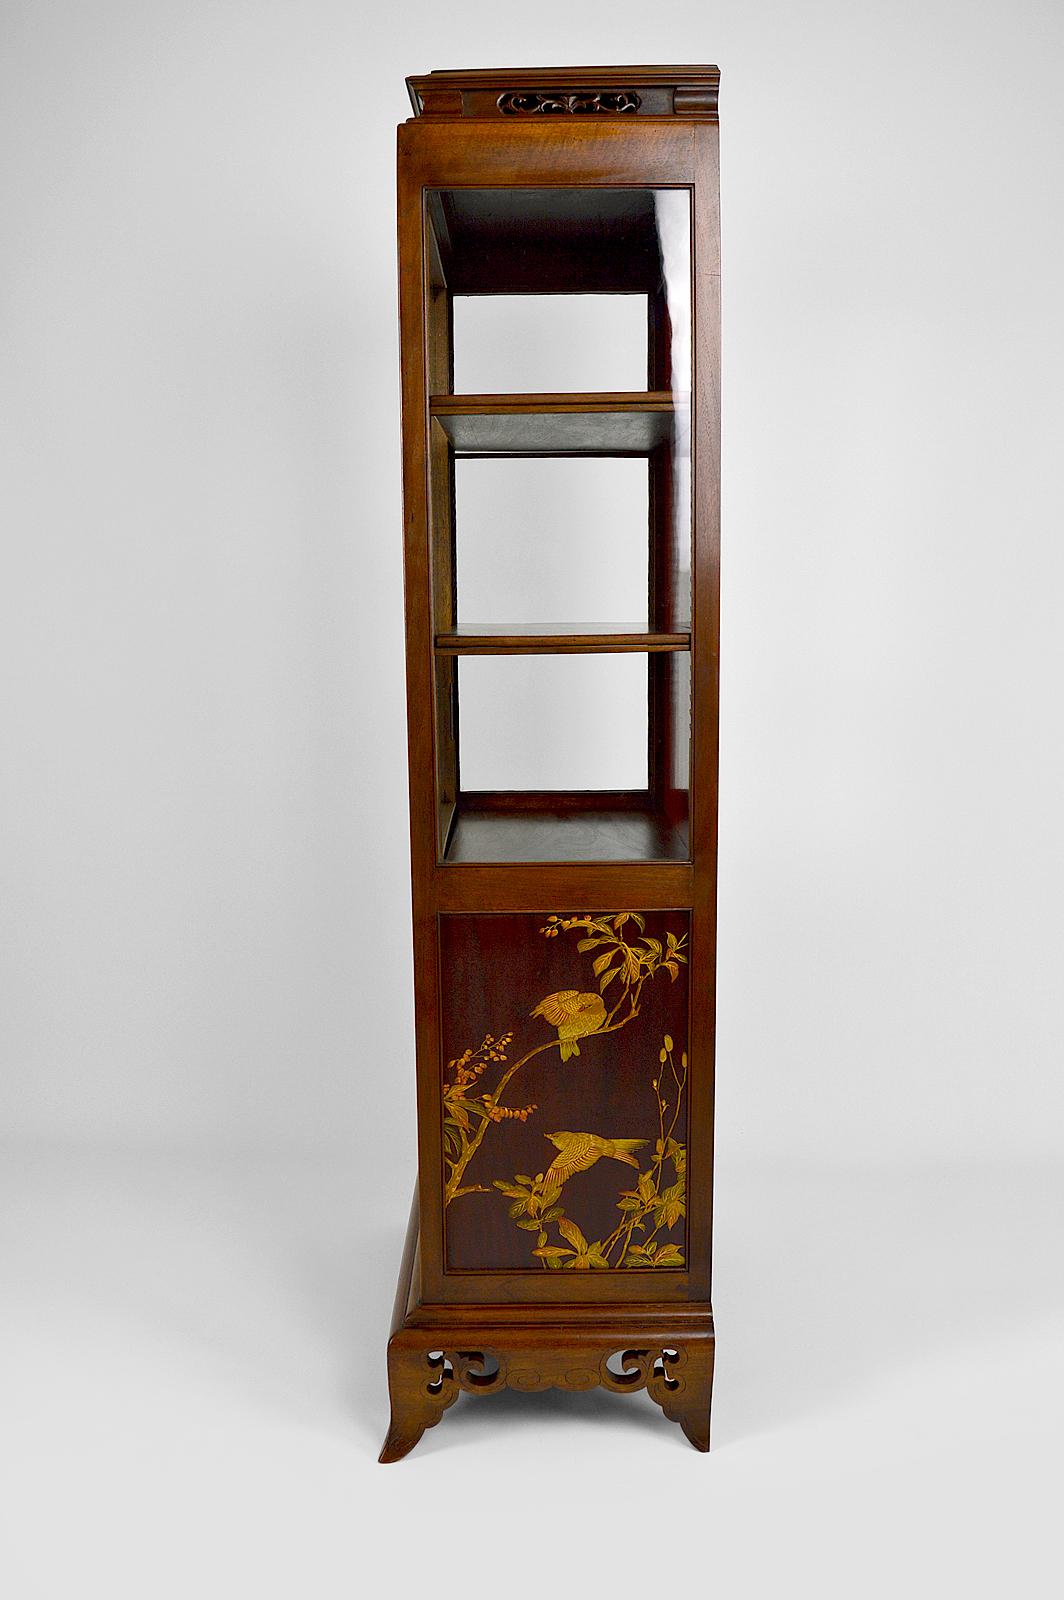 French Showcase with Inlaid Panels, attributed to Perret and Vibert, Japonisme, 1880